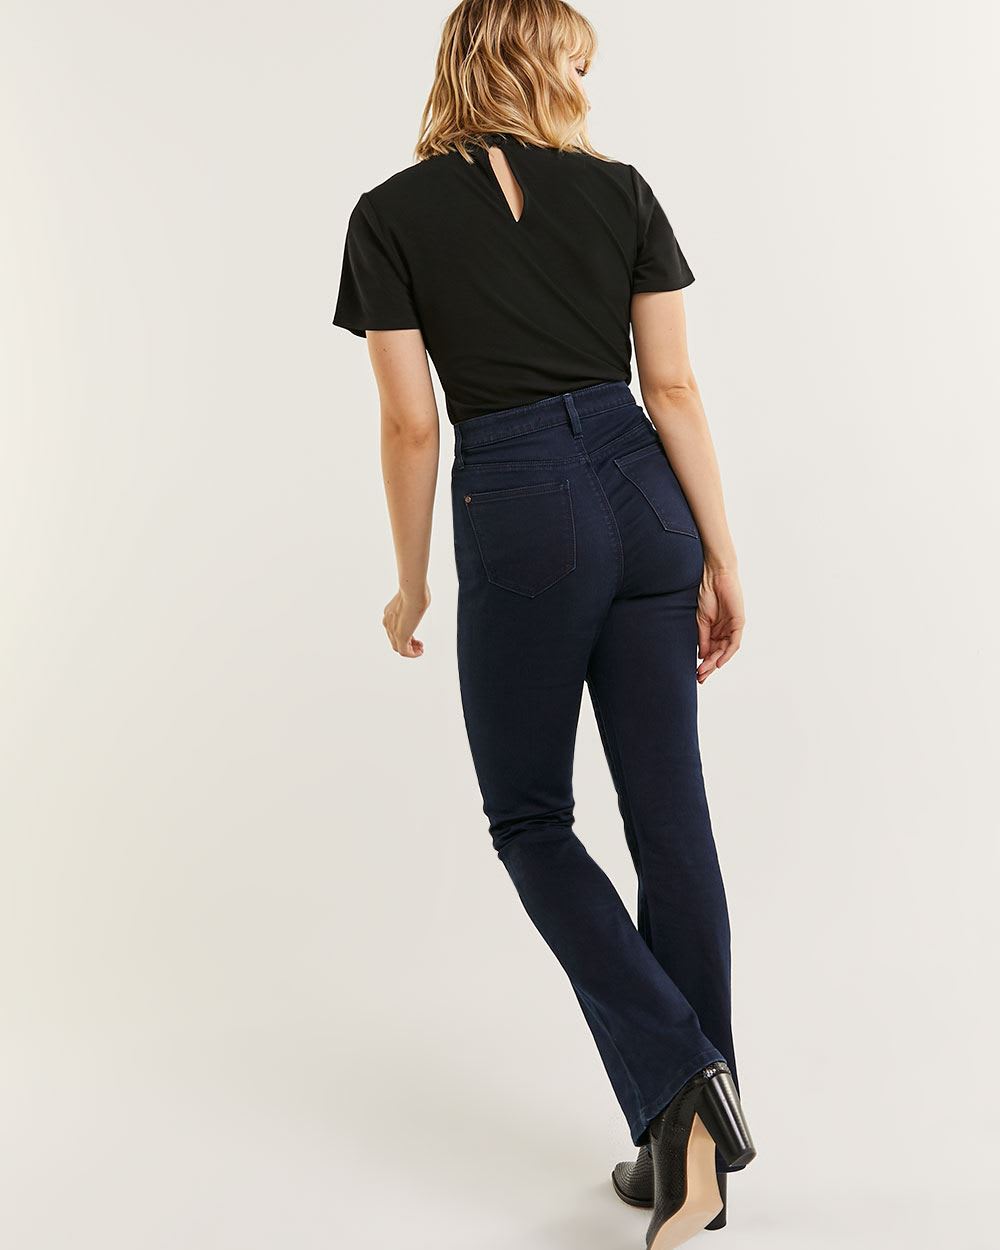 High Rise Boot Cut Jeans The Signature Soft